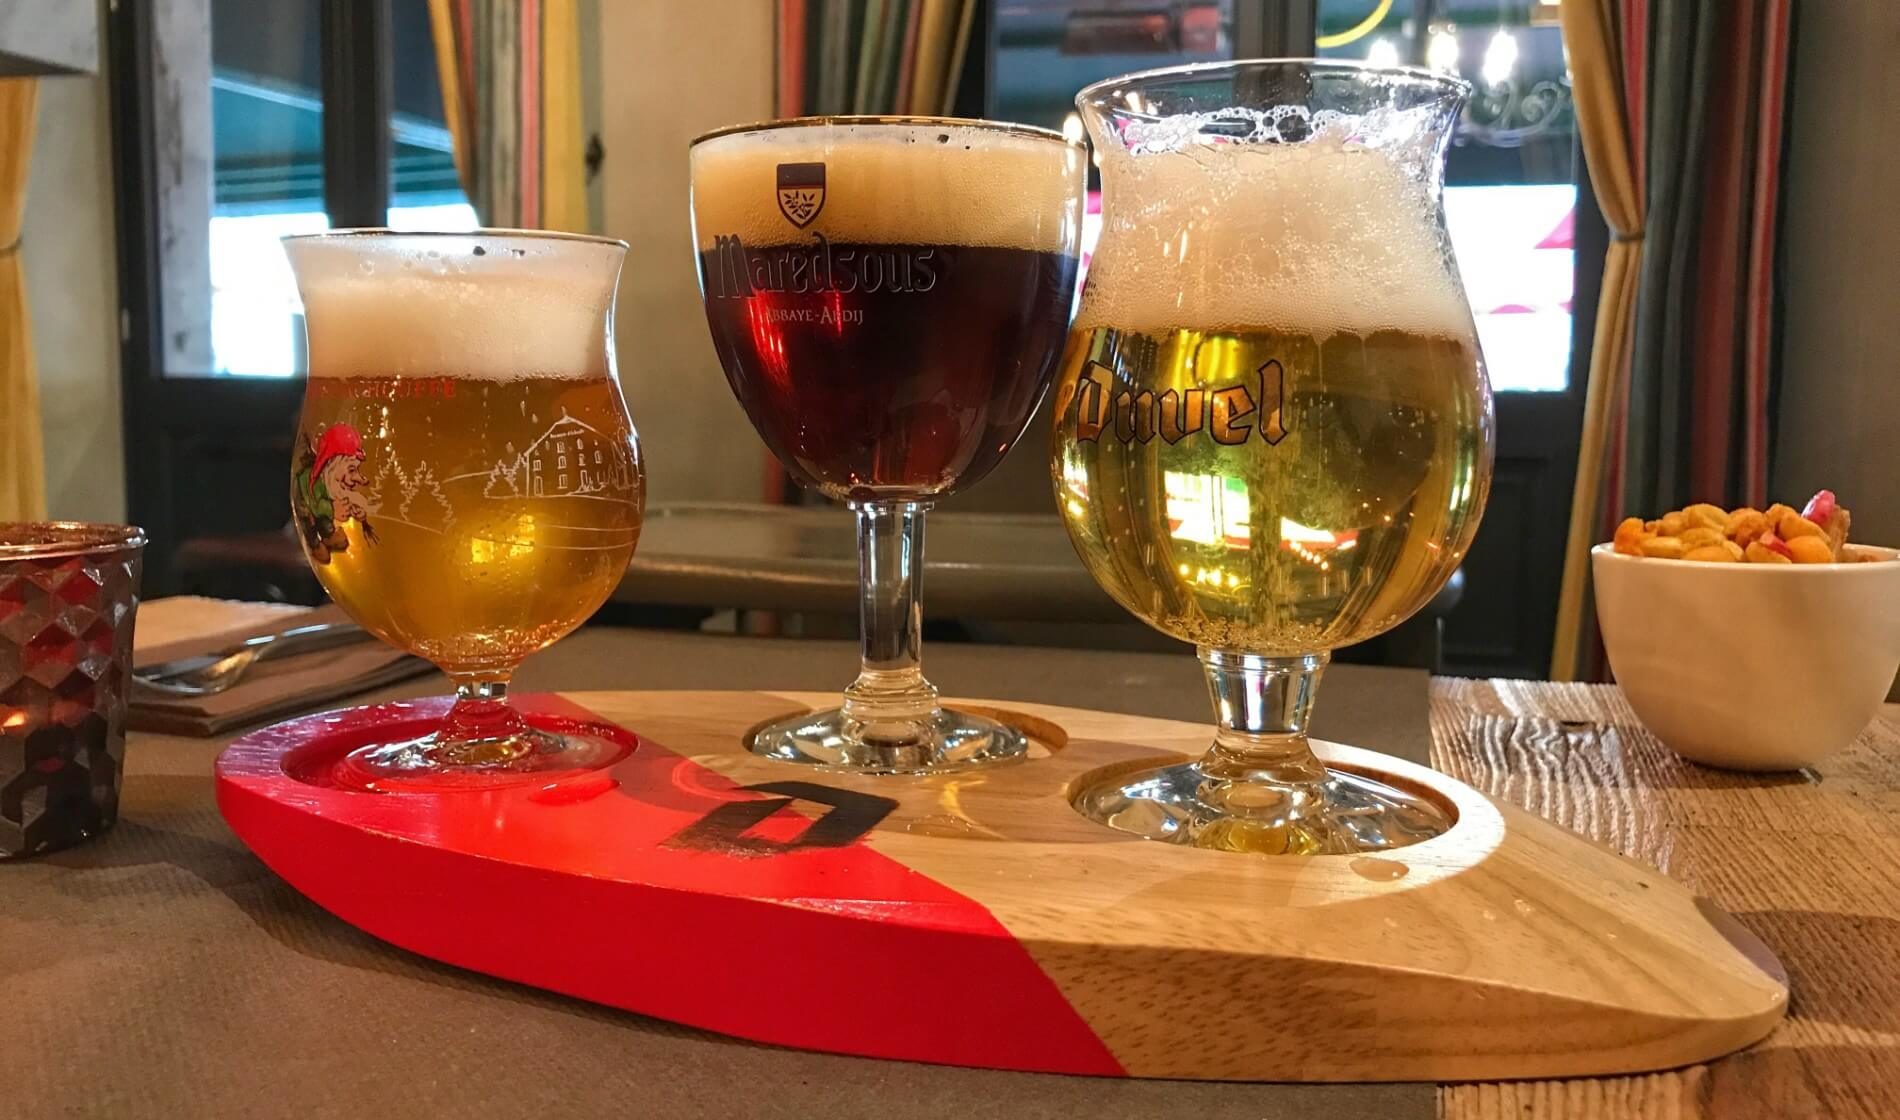 Three glasses of light and dark colored amber beer sitting on a red and tan wooden display tray